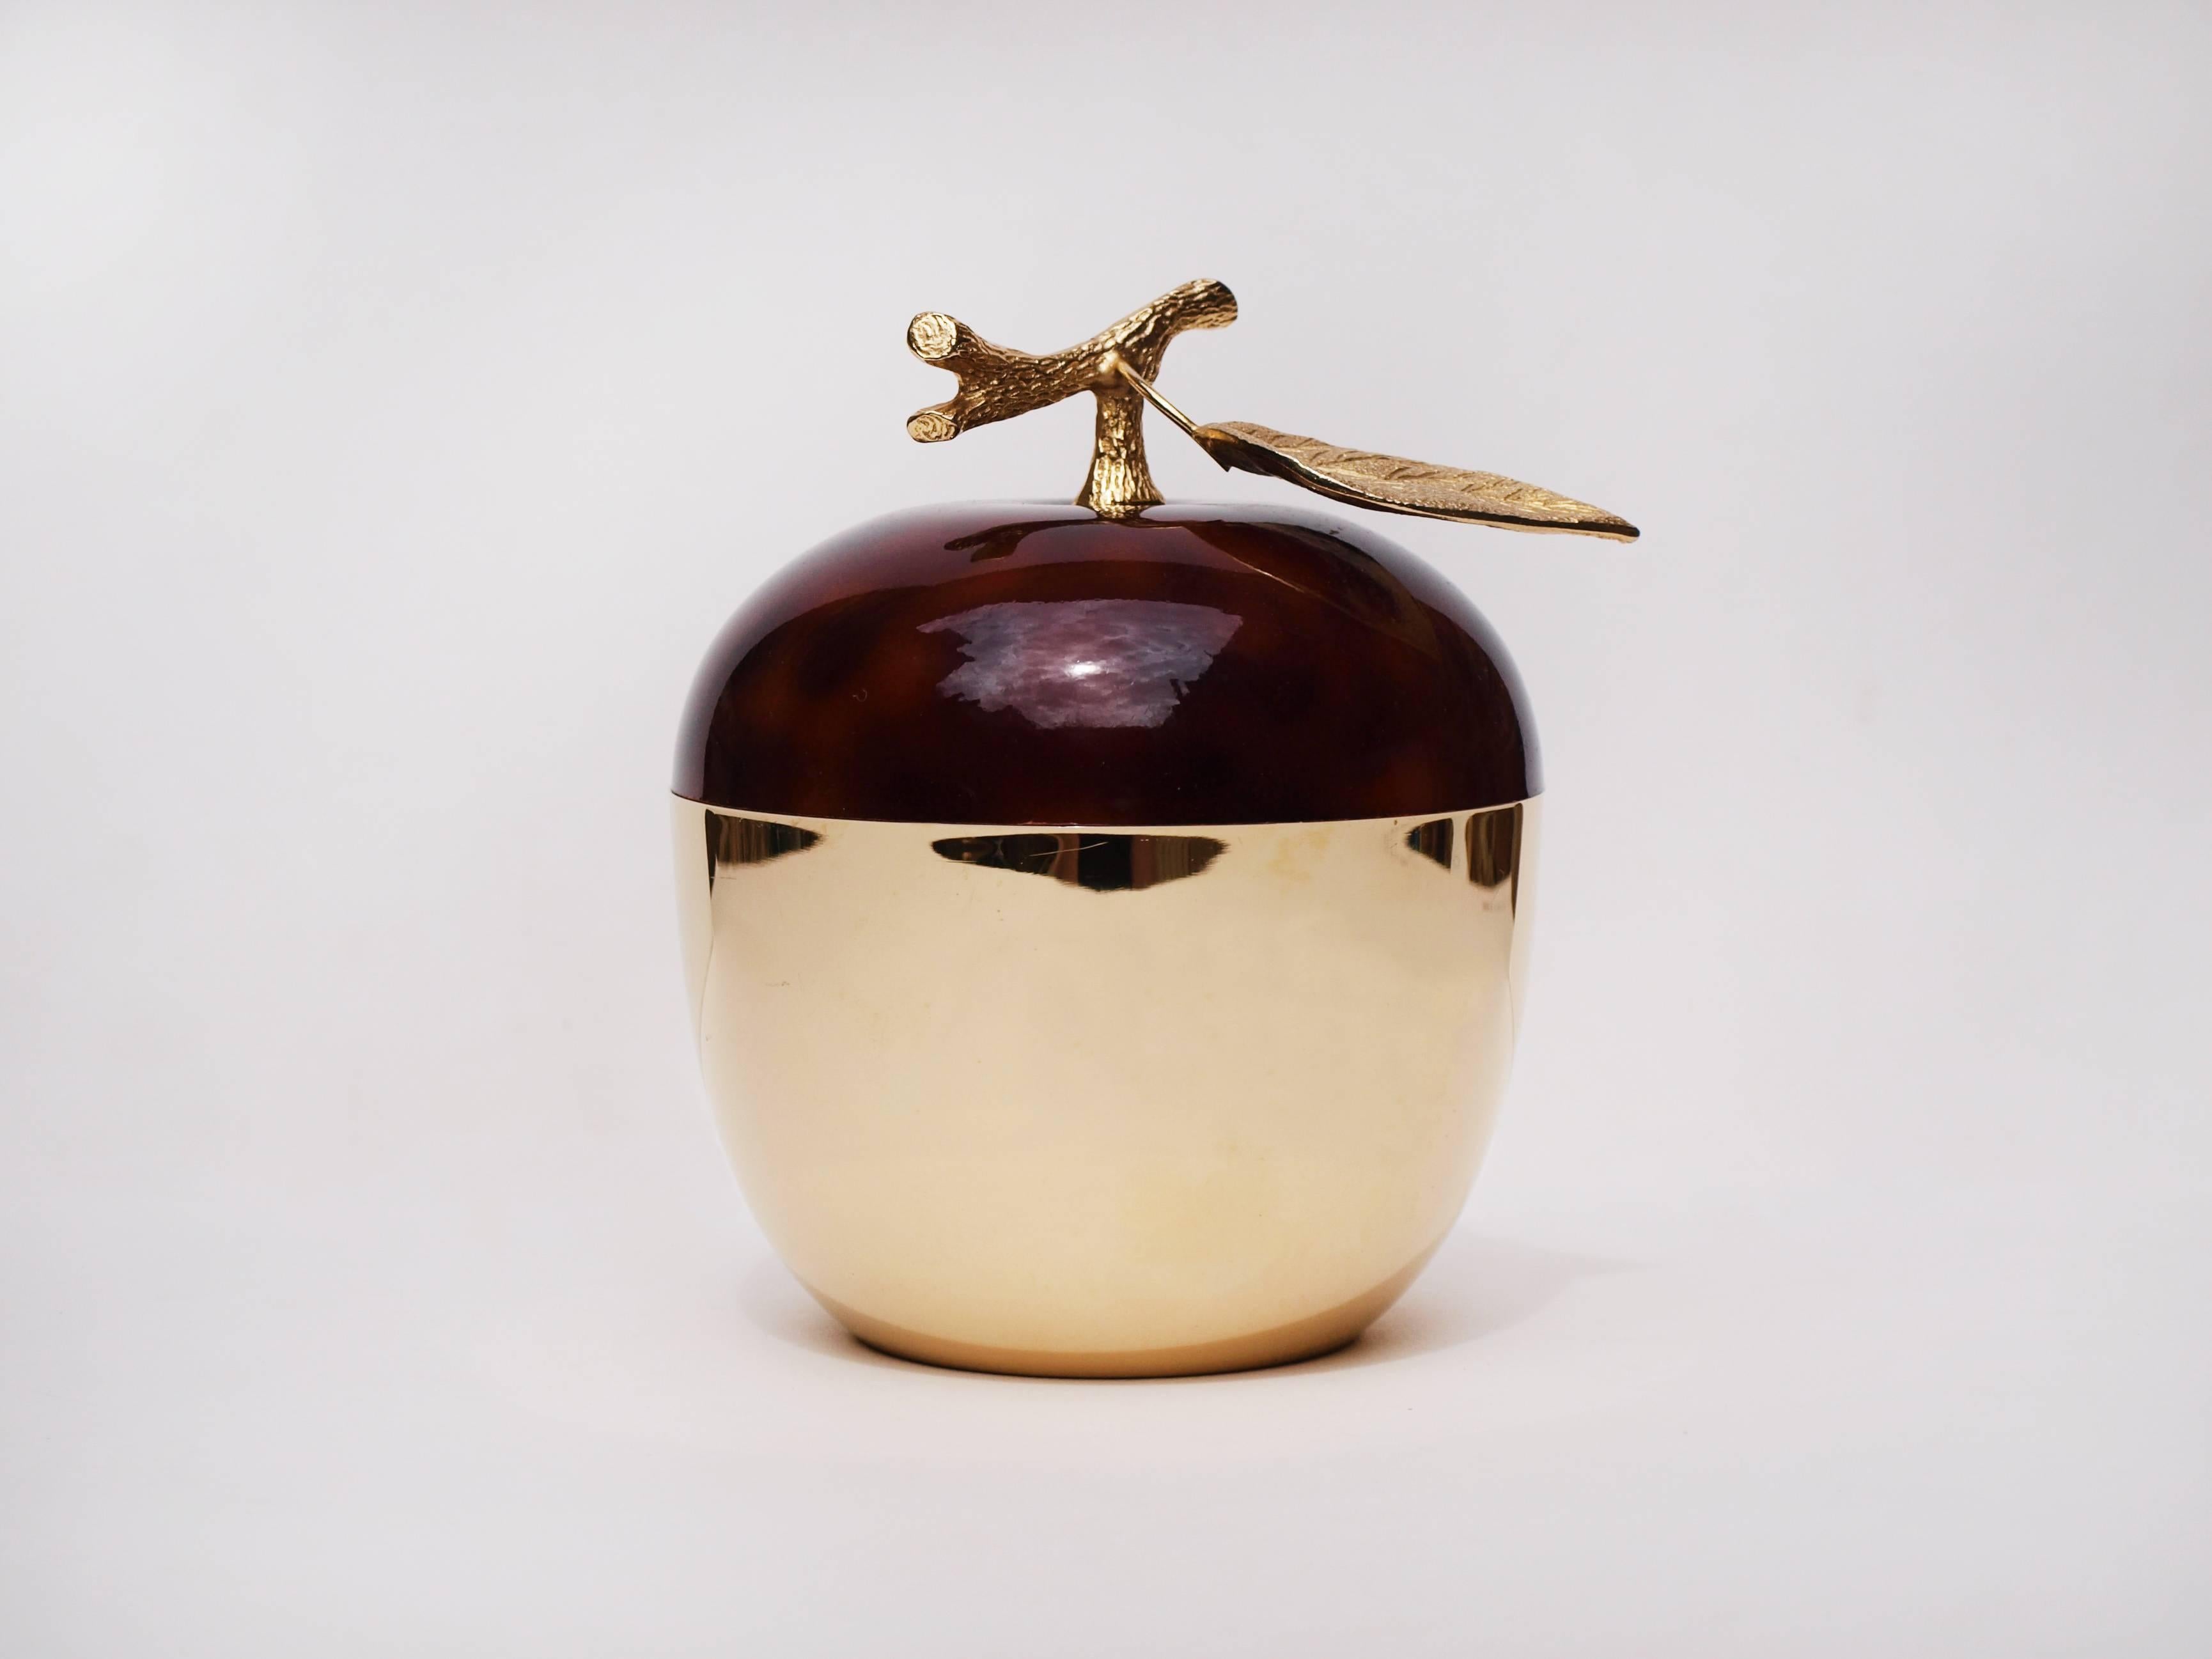 A vintage gold and tortoise shell effect, apple shaped ice bucket by the decorative tableware company ‘The Turnwald Collection’.

The reflective gold surface of the bucket seamlessly meets the high gloss tortoise shell surface of the lid,